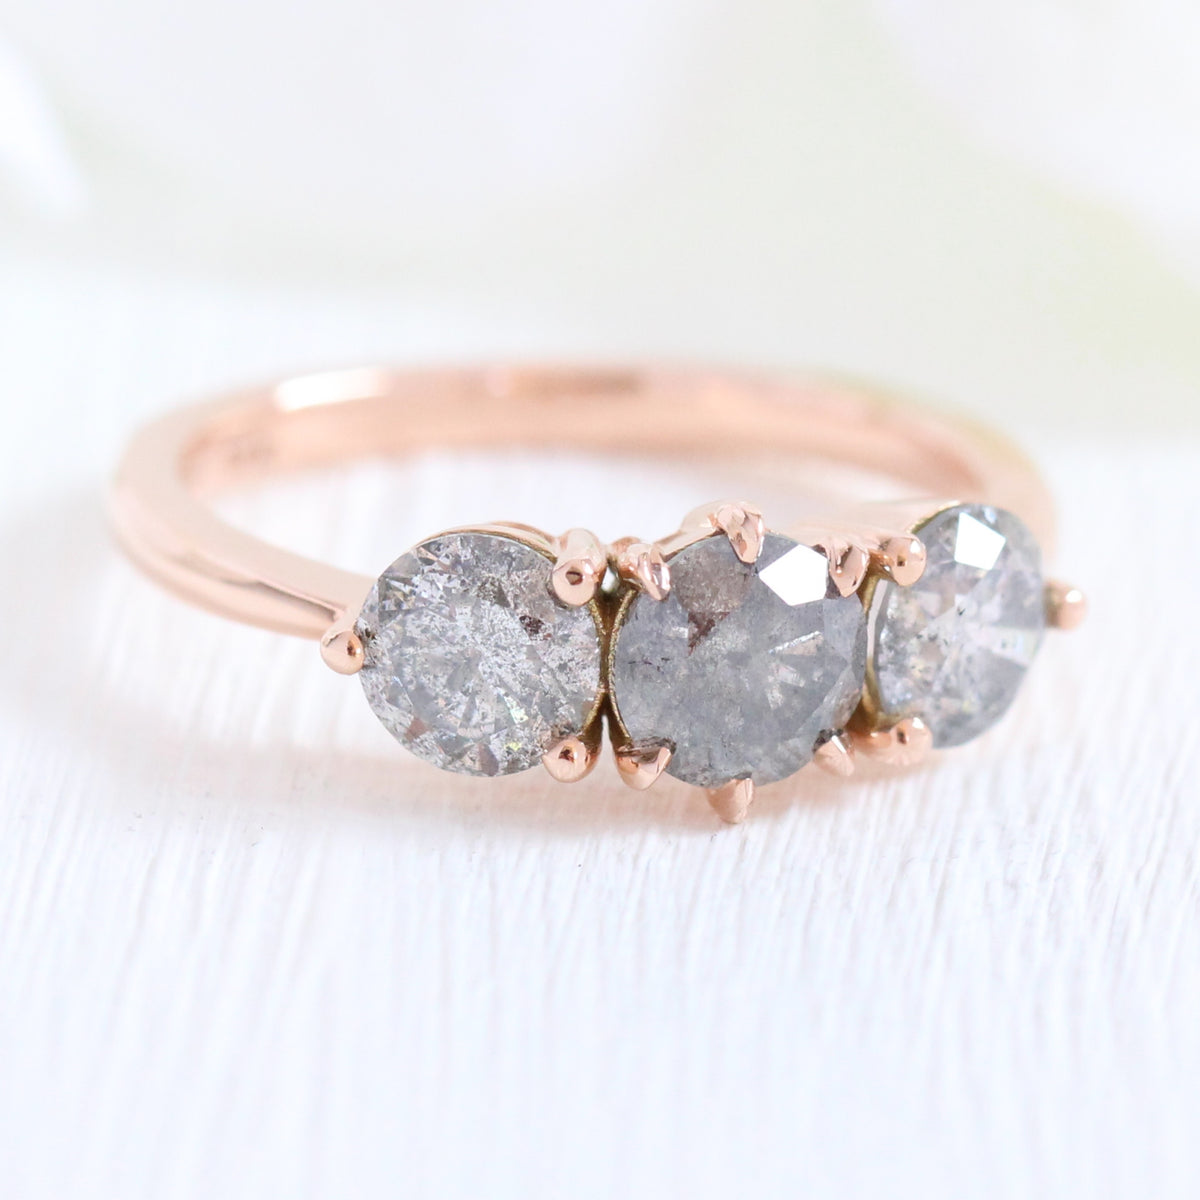 Large Salt and Pepper Grey Diamond Engagement Ring in Rose Gold 3 Stone Diamond Ring by La More Design Jewelry